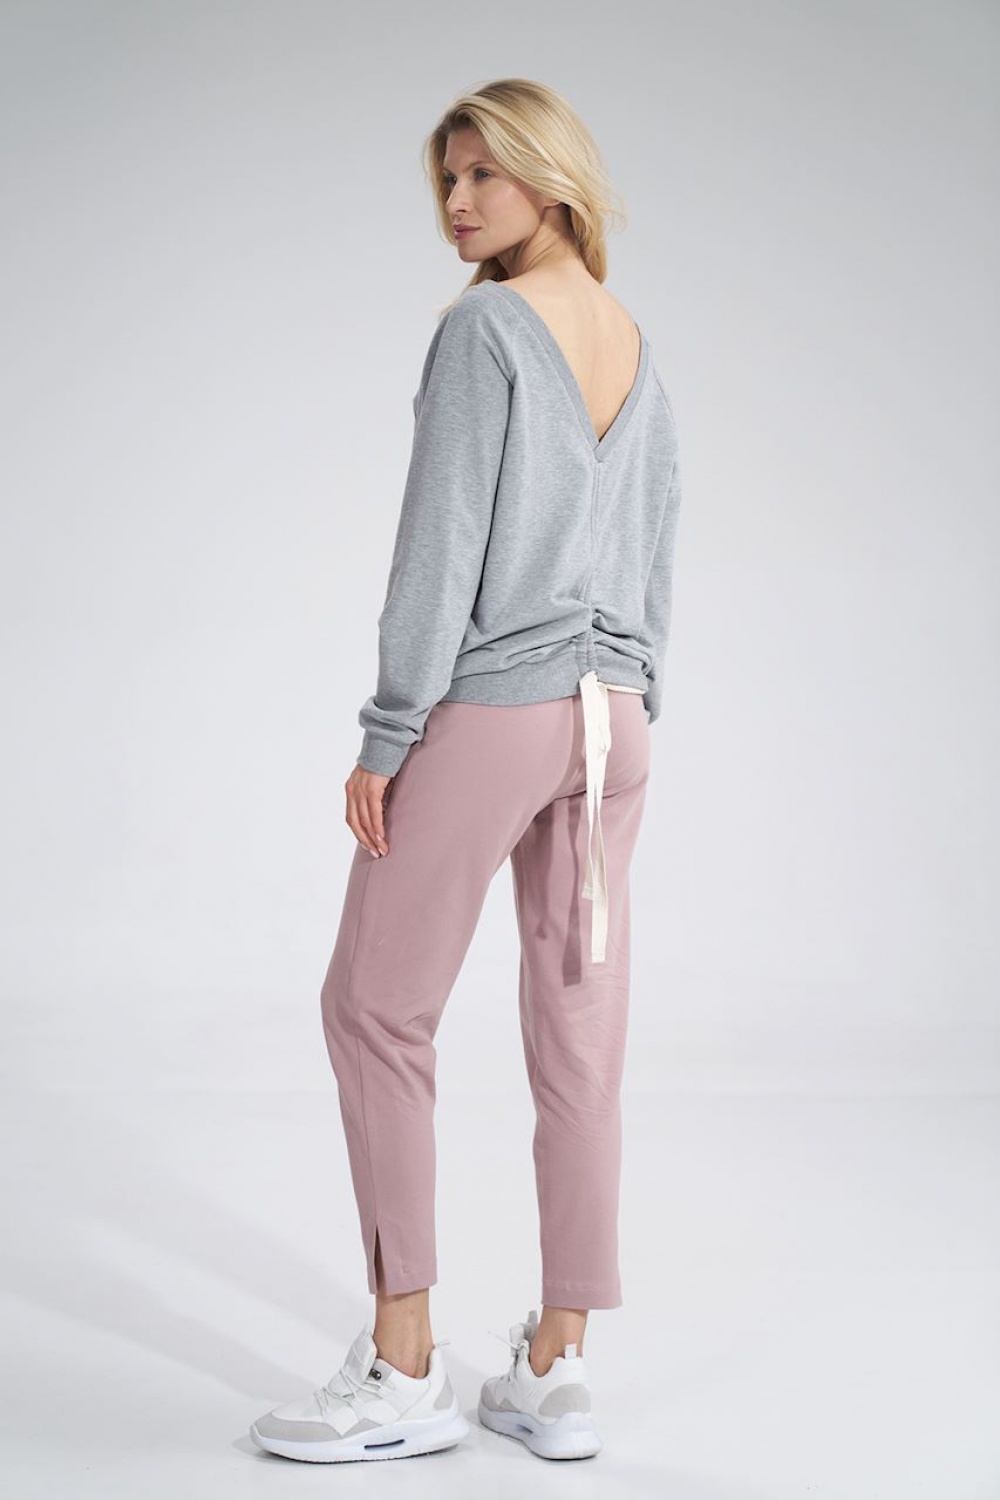  Tracksuit trousers model 155926 Figl  pink